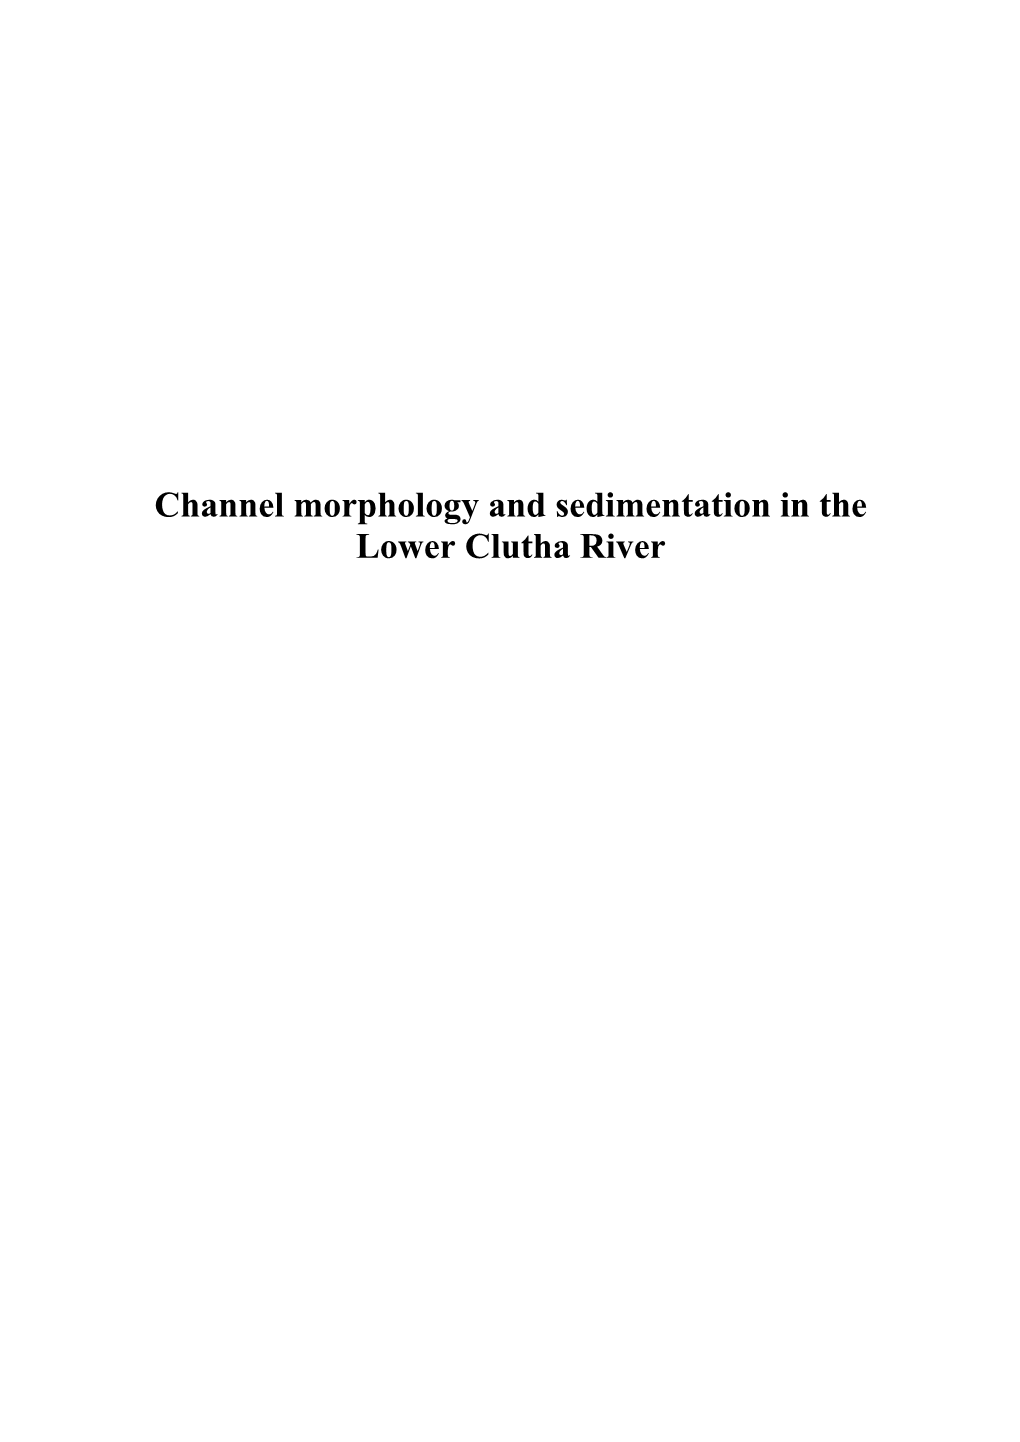 Channel Morphology and Sedimentation in the Lower Clutha River